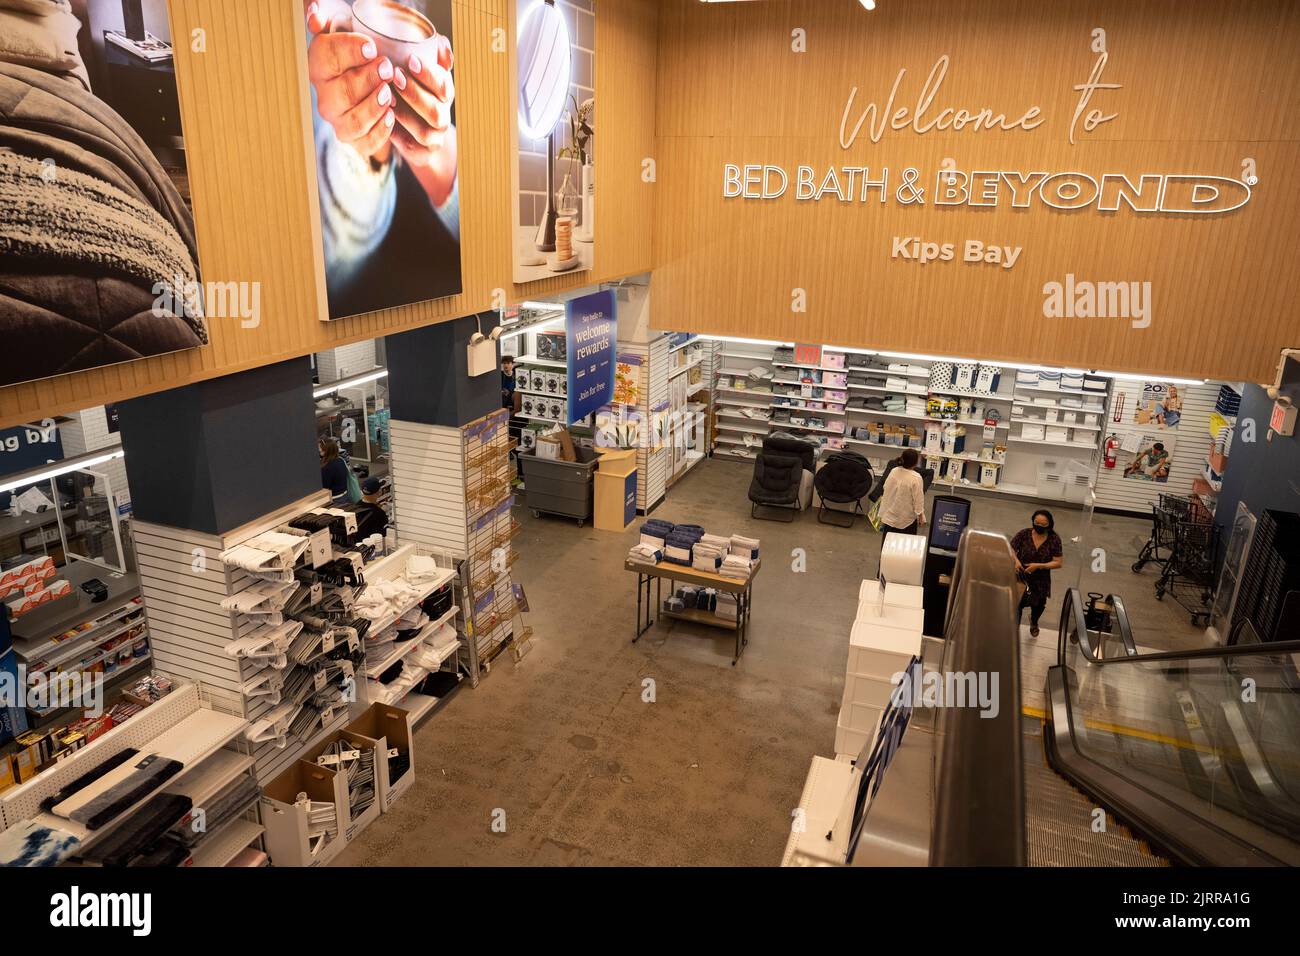 New York, New York, USA. 25th Aug, 2022. August 25, 2022: New York City, USA: Shoppers inside a Bed Bath and Beyond location on 3rd Avenue in Midtown Manhattan. $BBBY stock was targeted by the popular meme stock reddit community Wall Street Bets, famous for inflating the price of $GME Gamestop stock, in a short squeeze opportunity to make money off of Private Equity hedge funds attempting to short sale large volumes of retail stocks. Billionaire activist shareholder Ryan Cohen exited from the stock and sold off his 10% stake, but the company recently raised a new loan with the help of J.P. M Stock Photo